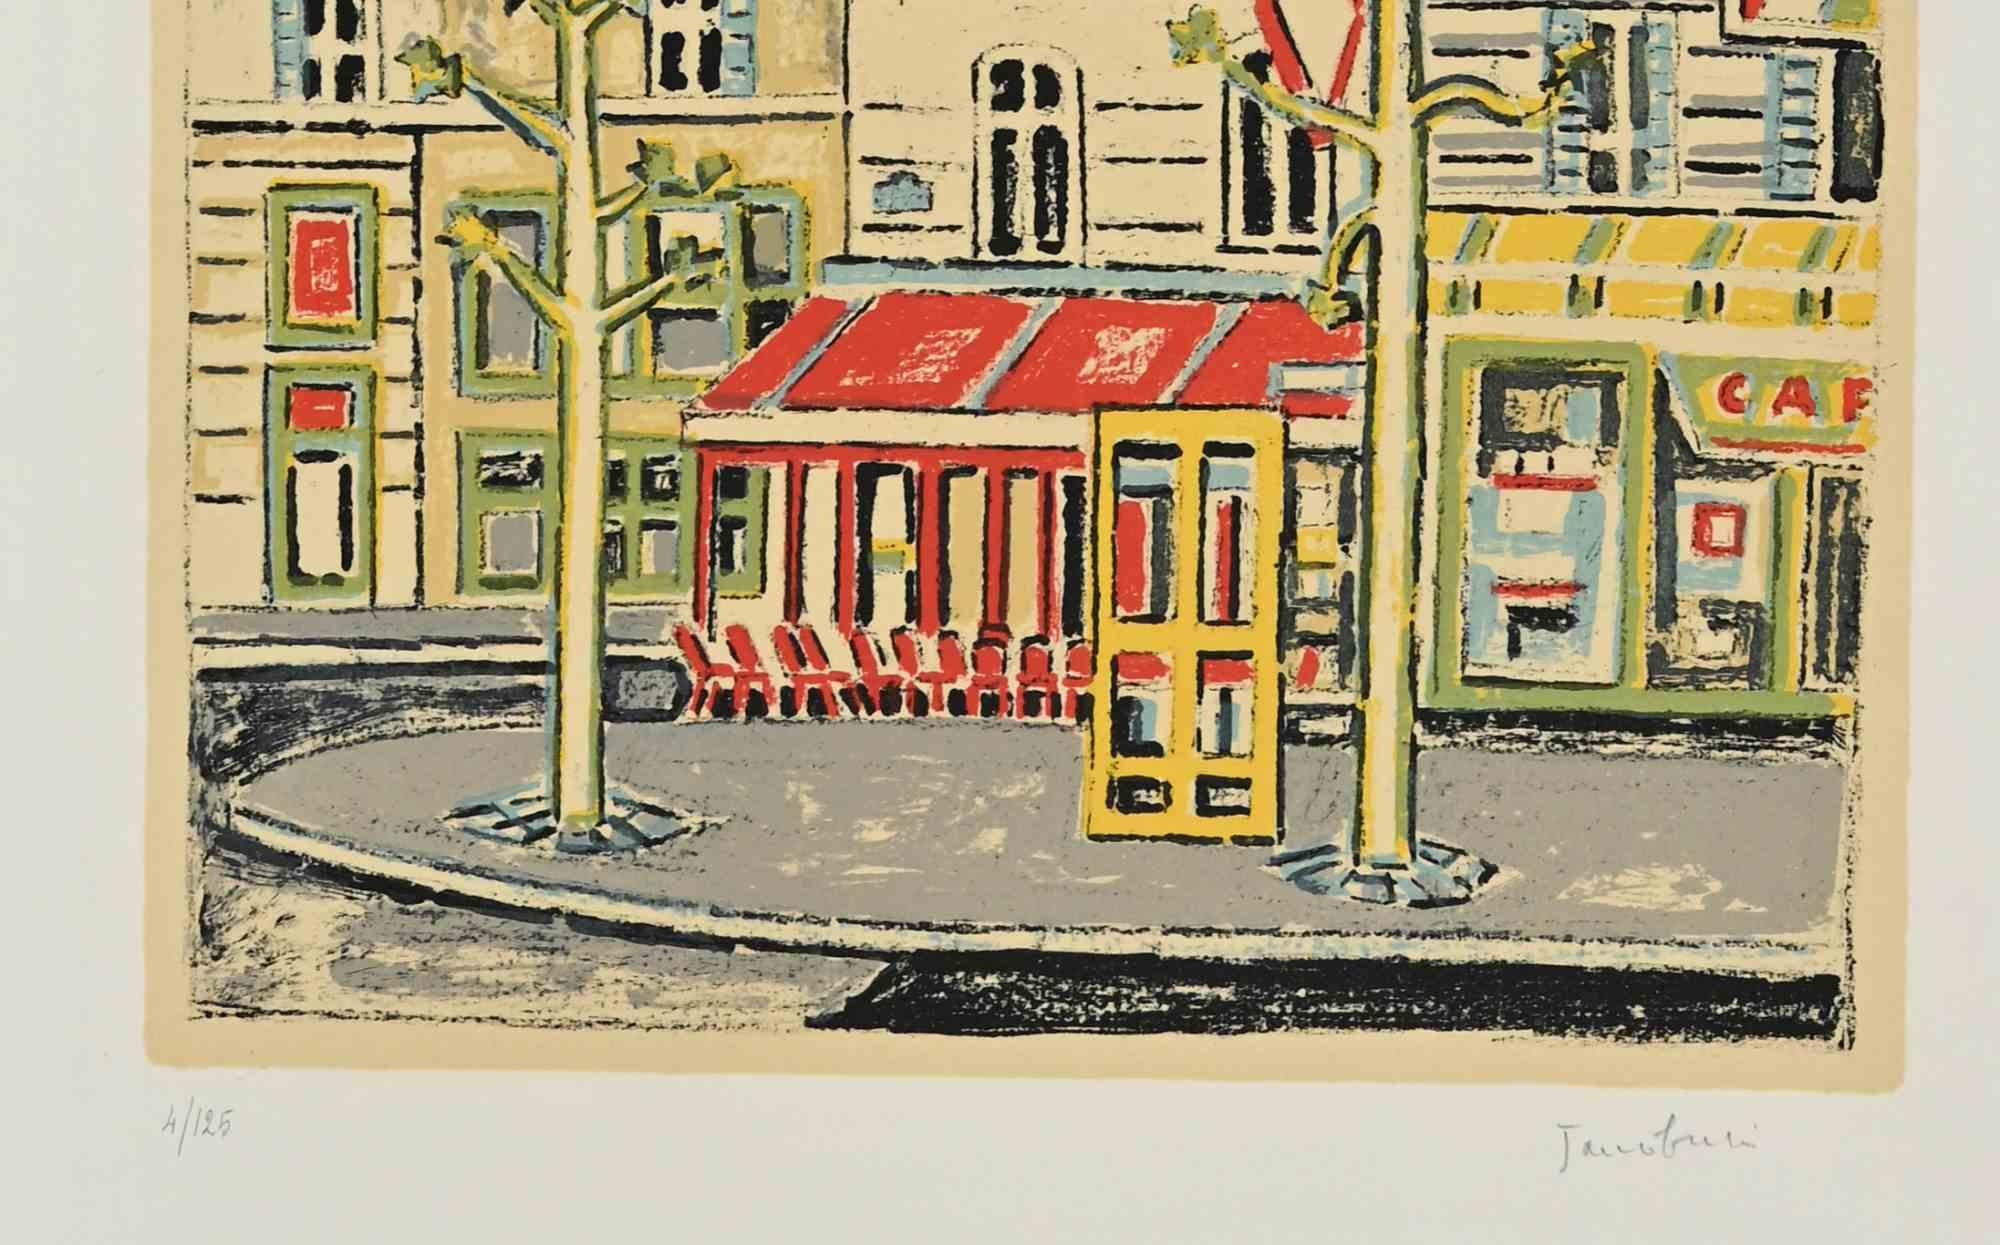 Parisien Café is a Modern artwork realized by Orfeo Tamburi  (Jesi, 1910 – Paris,1994)  in the 1970s. 

Colored Lithograph. 

Hand-signed.

Numbered on the lower, Edition, 125 prints.

Good conditions. 

Orfeo Tamburi (Jesi, Ancona,1910-Paris,1994)